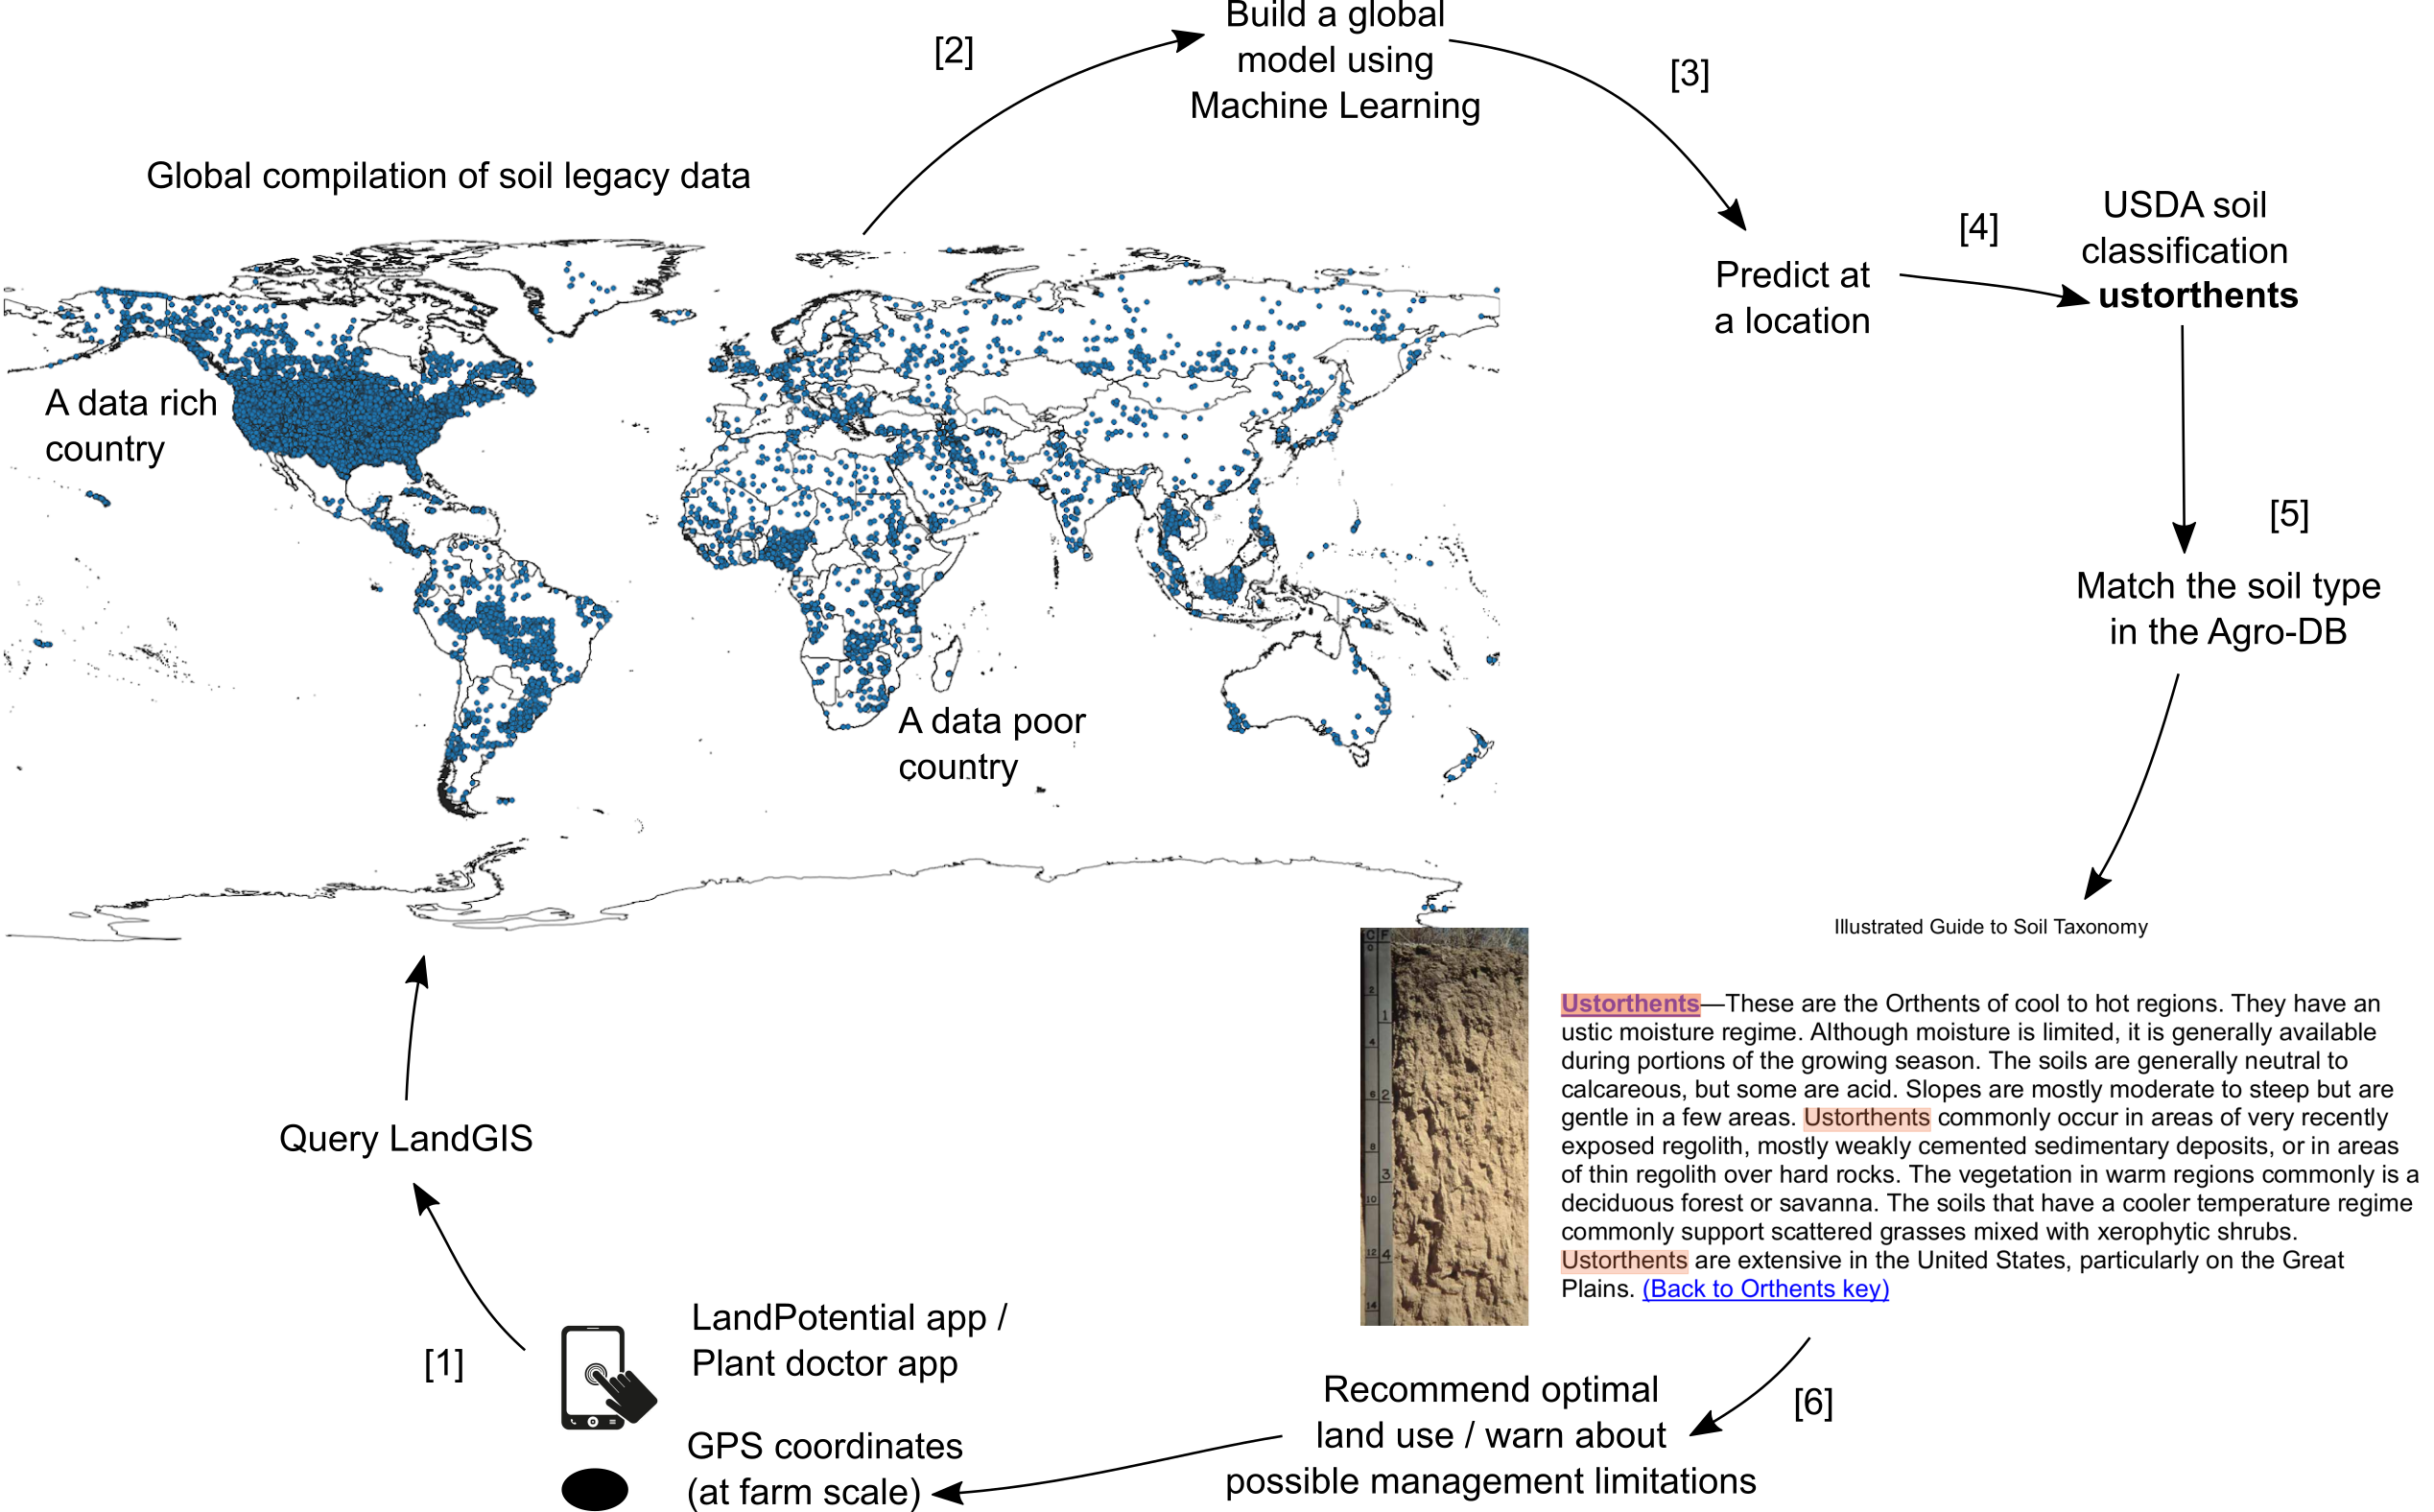 LandGIS as a system for generating new added-value information immediately and affordably using “old legacy data” i.e. without new investments. By importing, cleaning up and data mining of legacy soil data we promote technology and knowledge transfer from data-rich countries to data-poor countries.